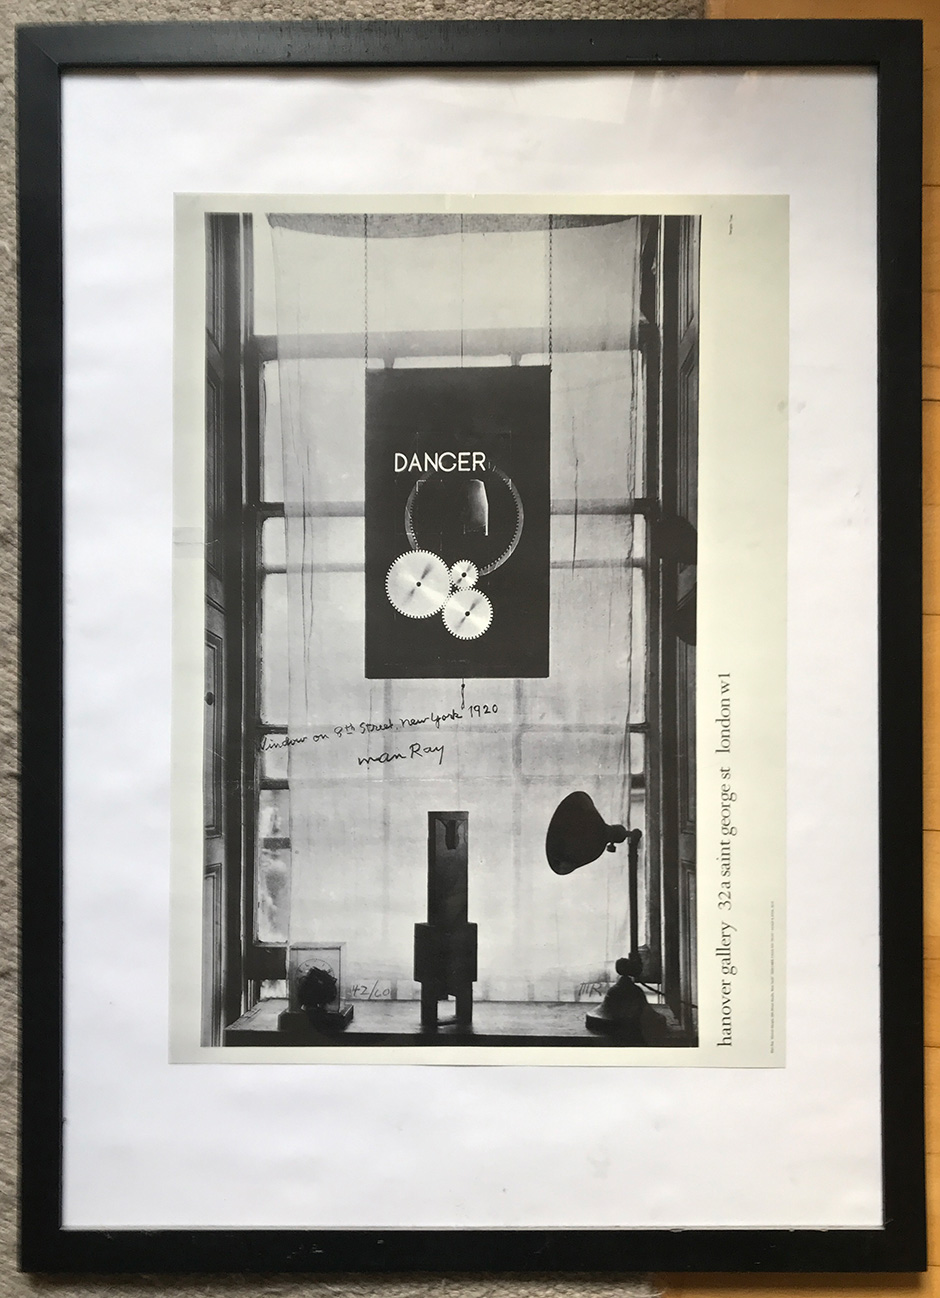 Exhibition Poster for Dancer/Danger, Window on 8th Street, New York, 1920 at Hanover Gallery, London, 1969